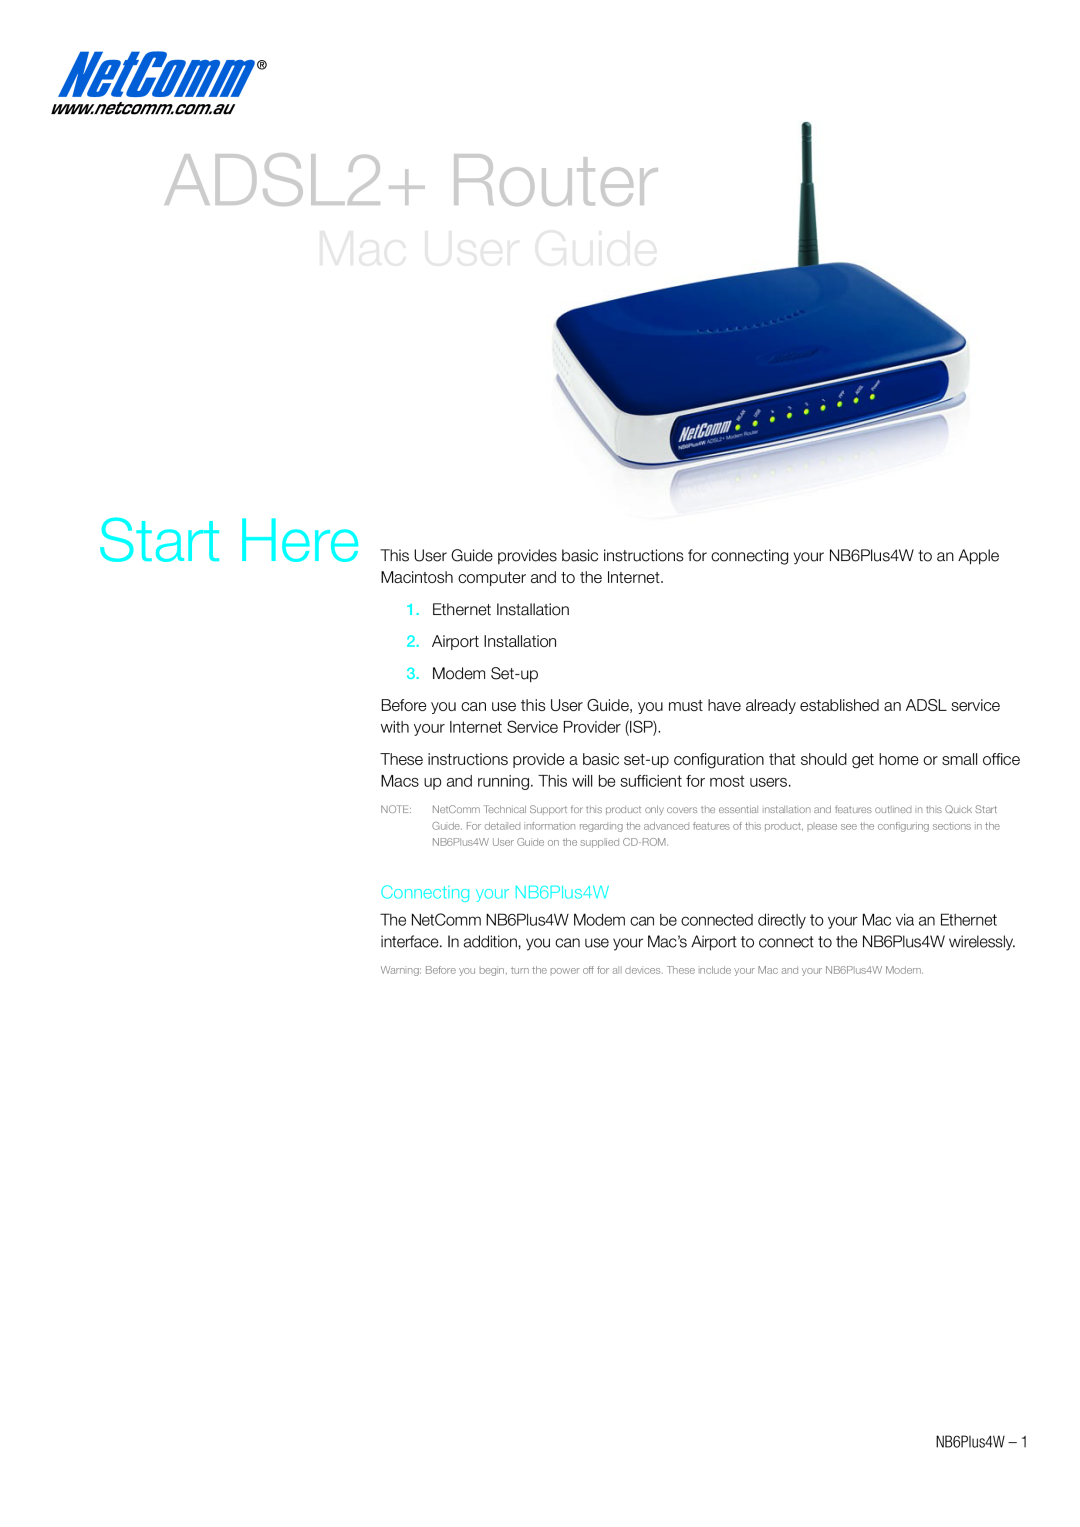 NetComm NB6PLUS4W quick start ADSL2+ Router, Mac User Guide, Connecting your NB6Plus4W 